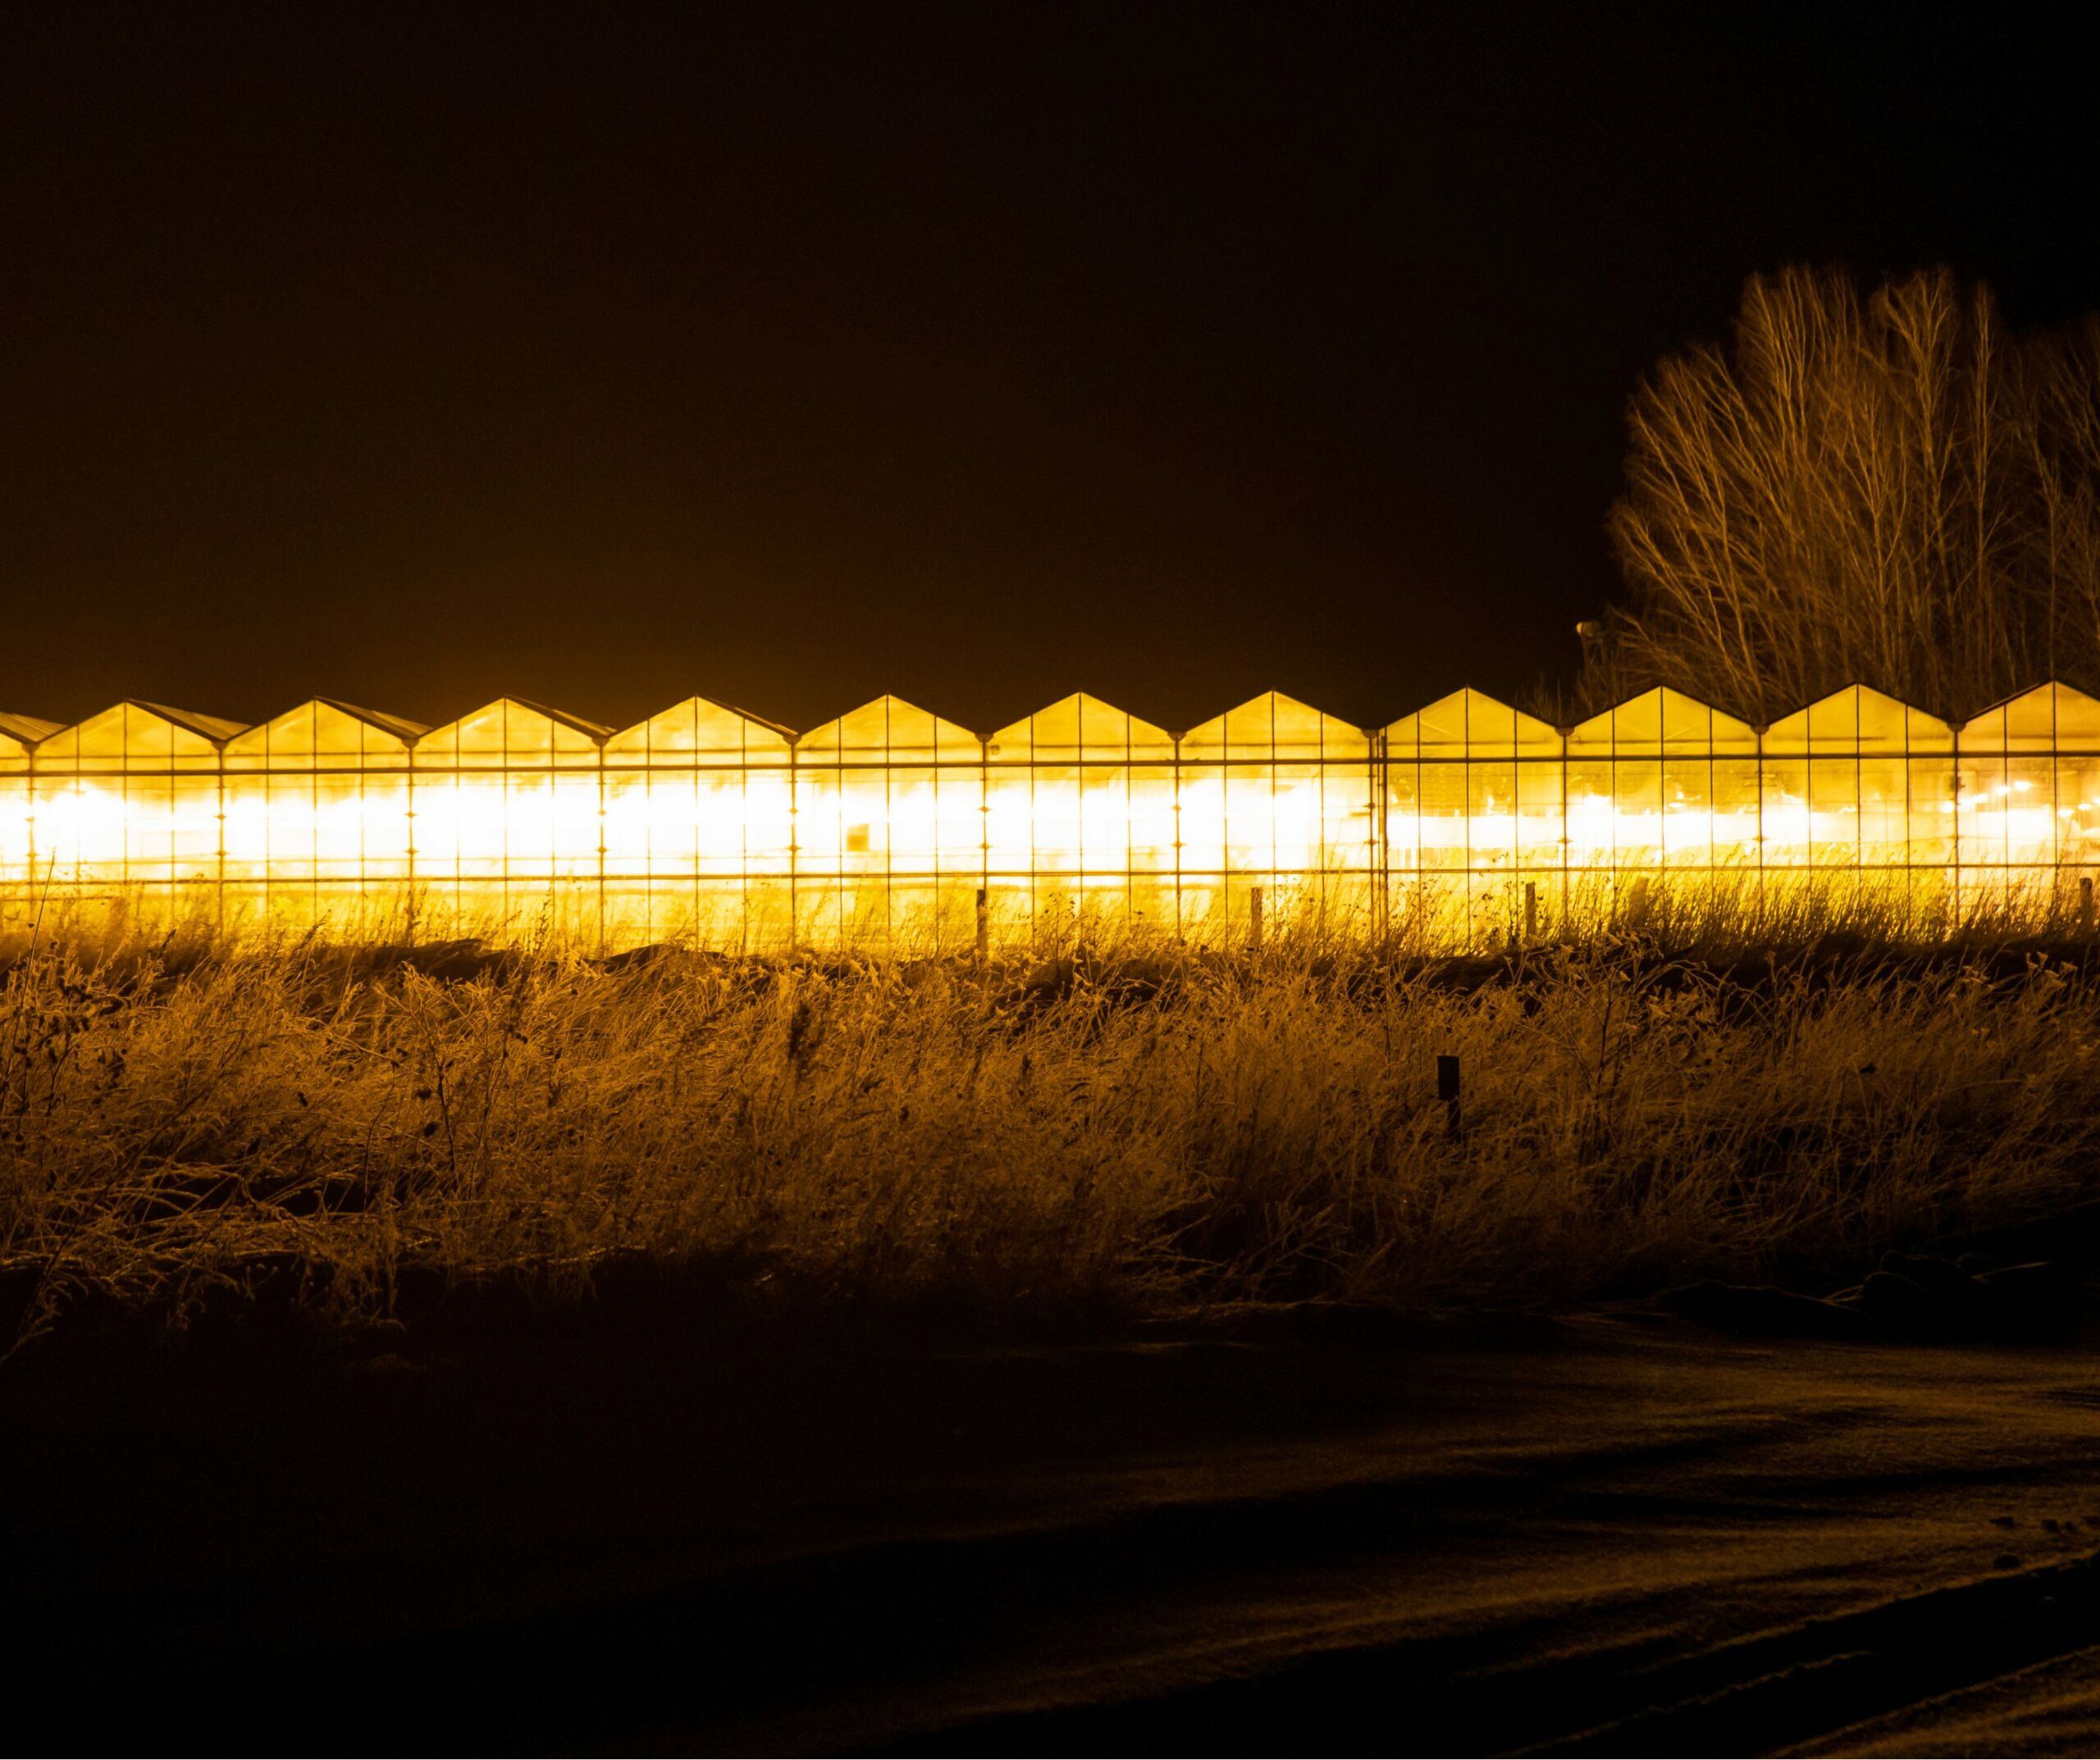 Light pollution from greenhouses at night